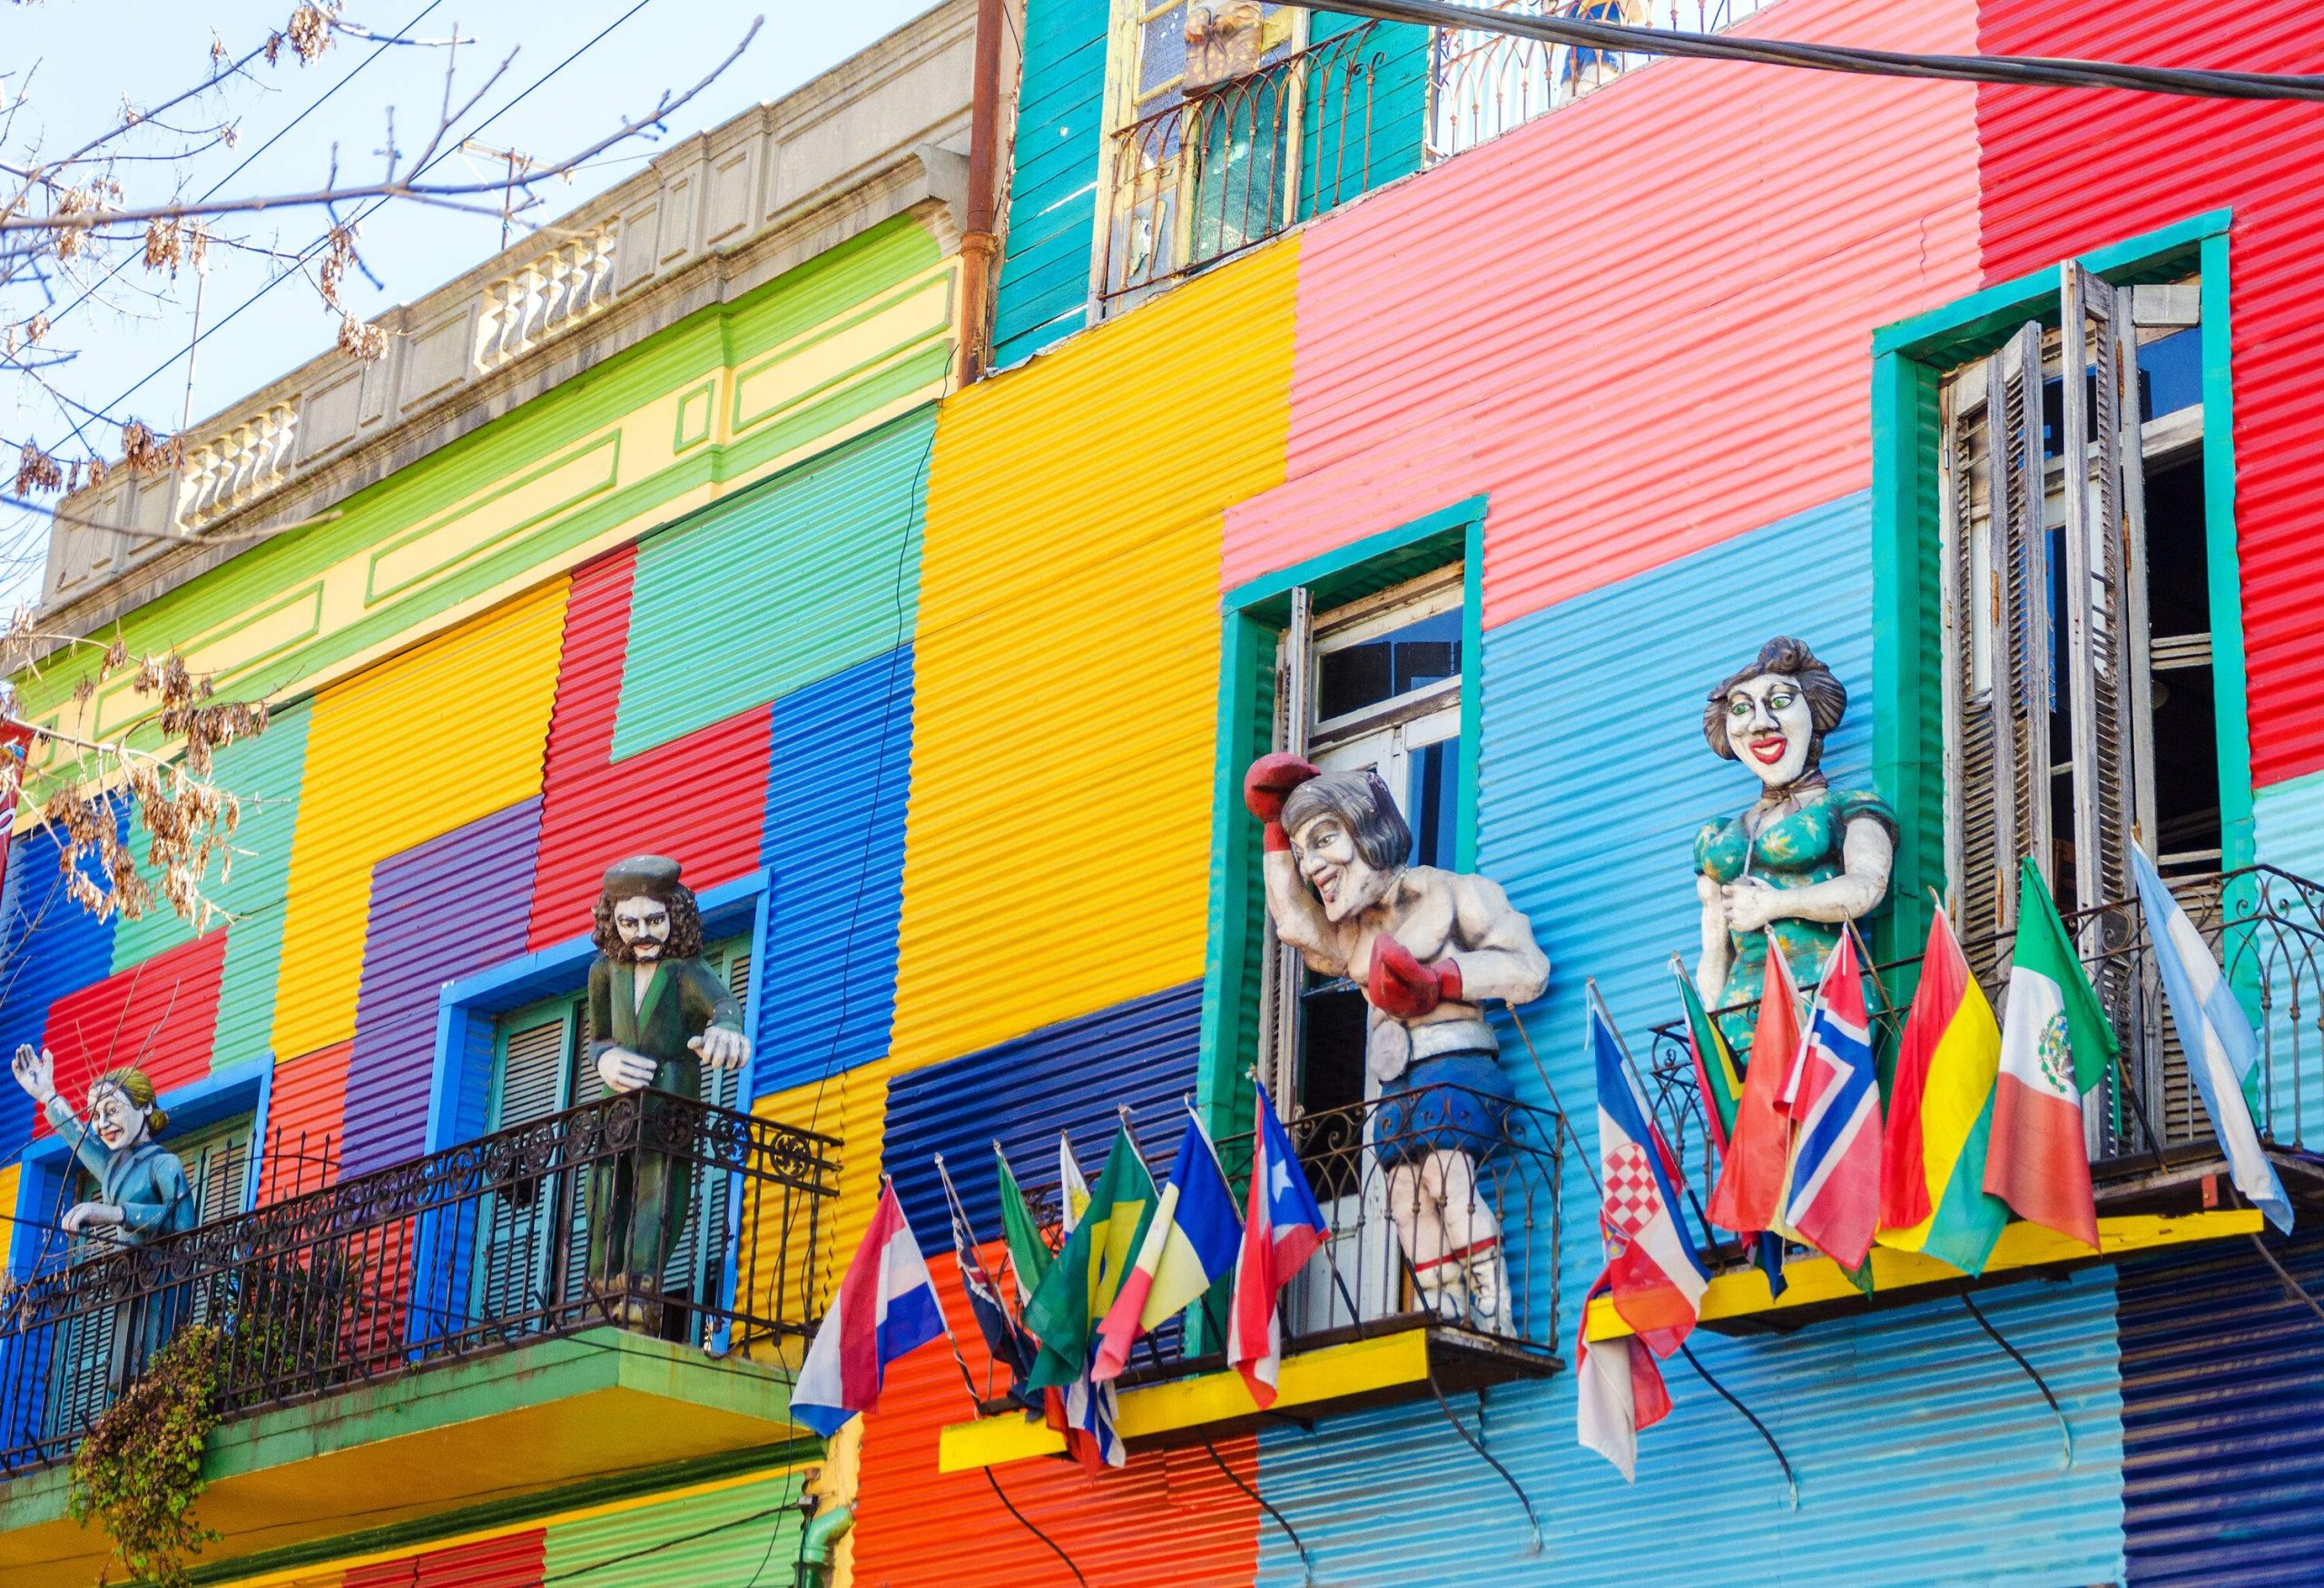 A building with colourful walls with human statues and country flags on its balconies.